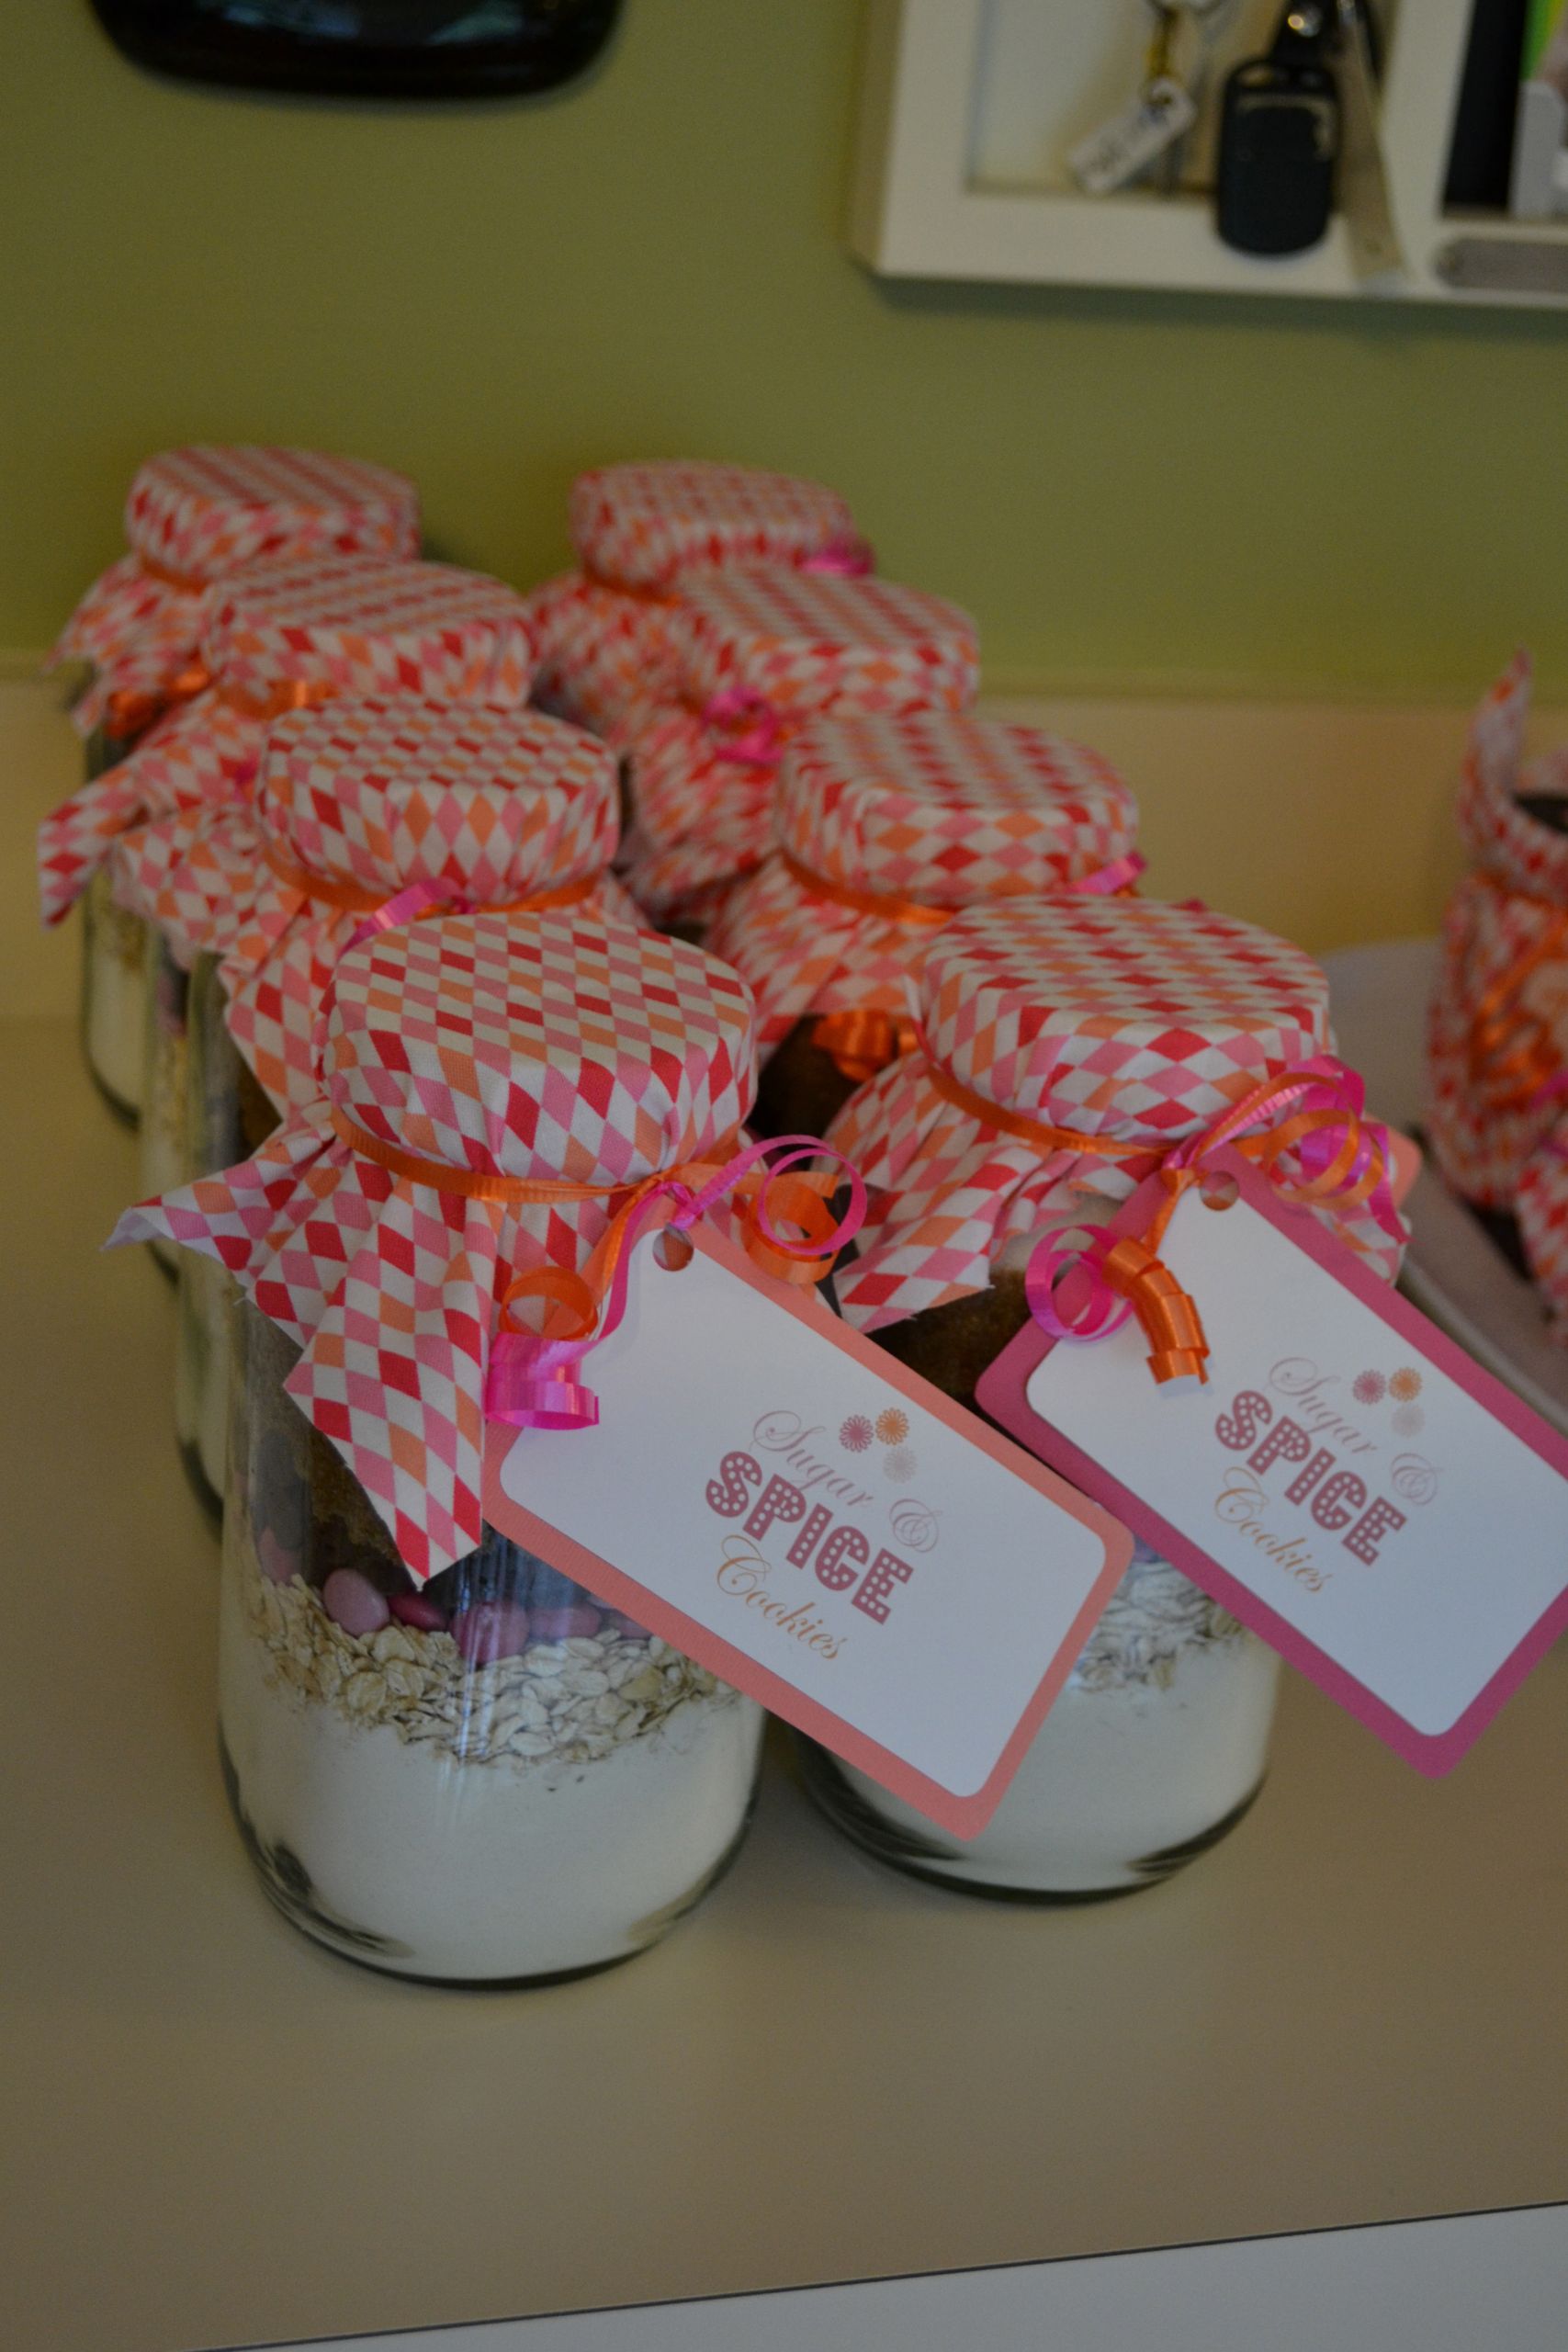 Baby Shower Crafts To Make
 Sugar and Spice Baby Shower Crafts and Ideas